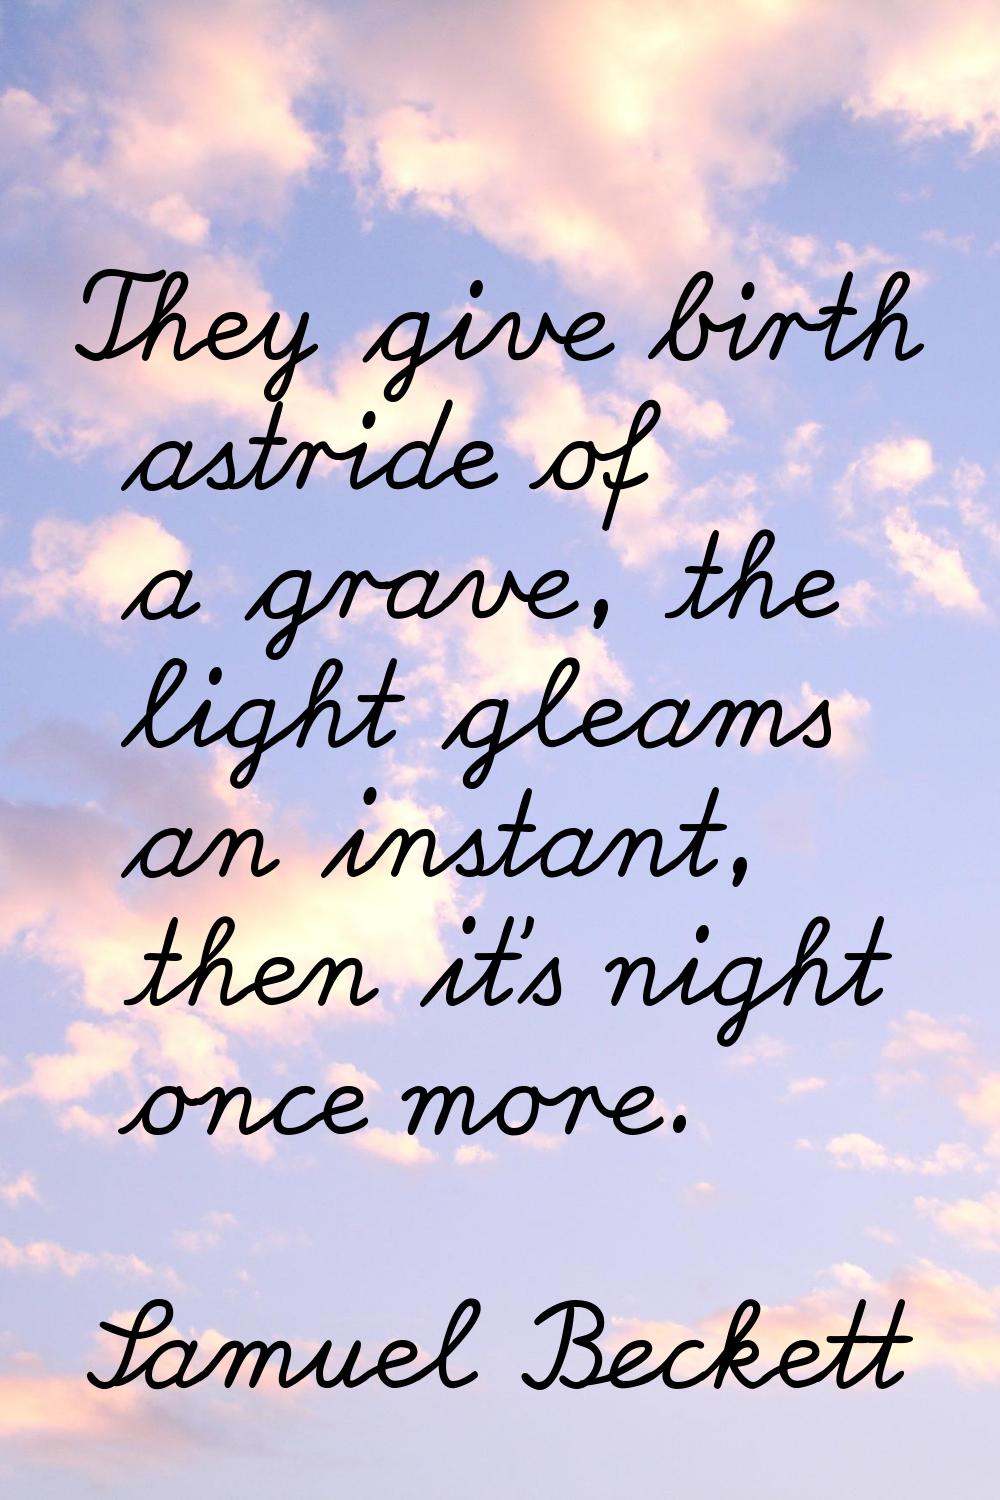 They give birth astride of a grave, the light gleams an instant, then it's night once more.